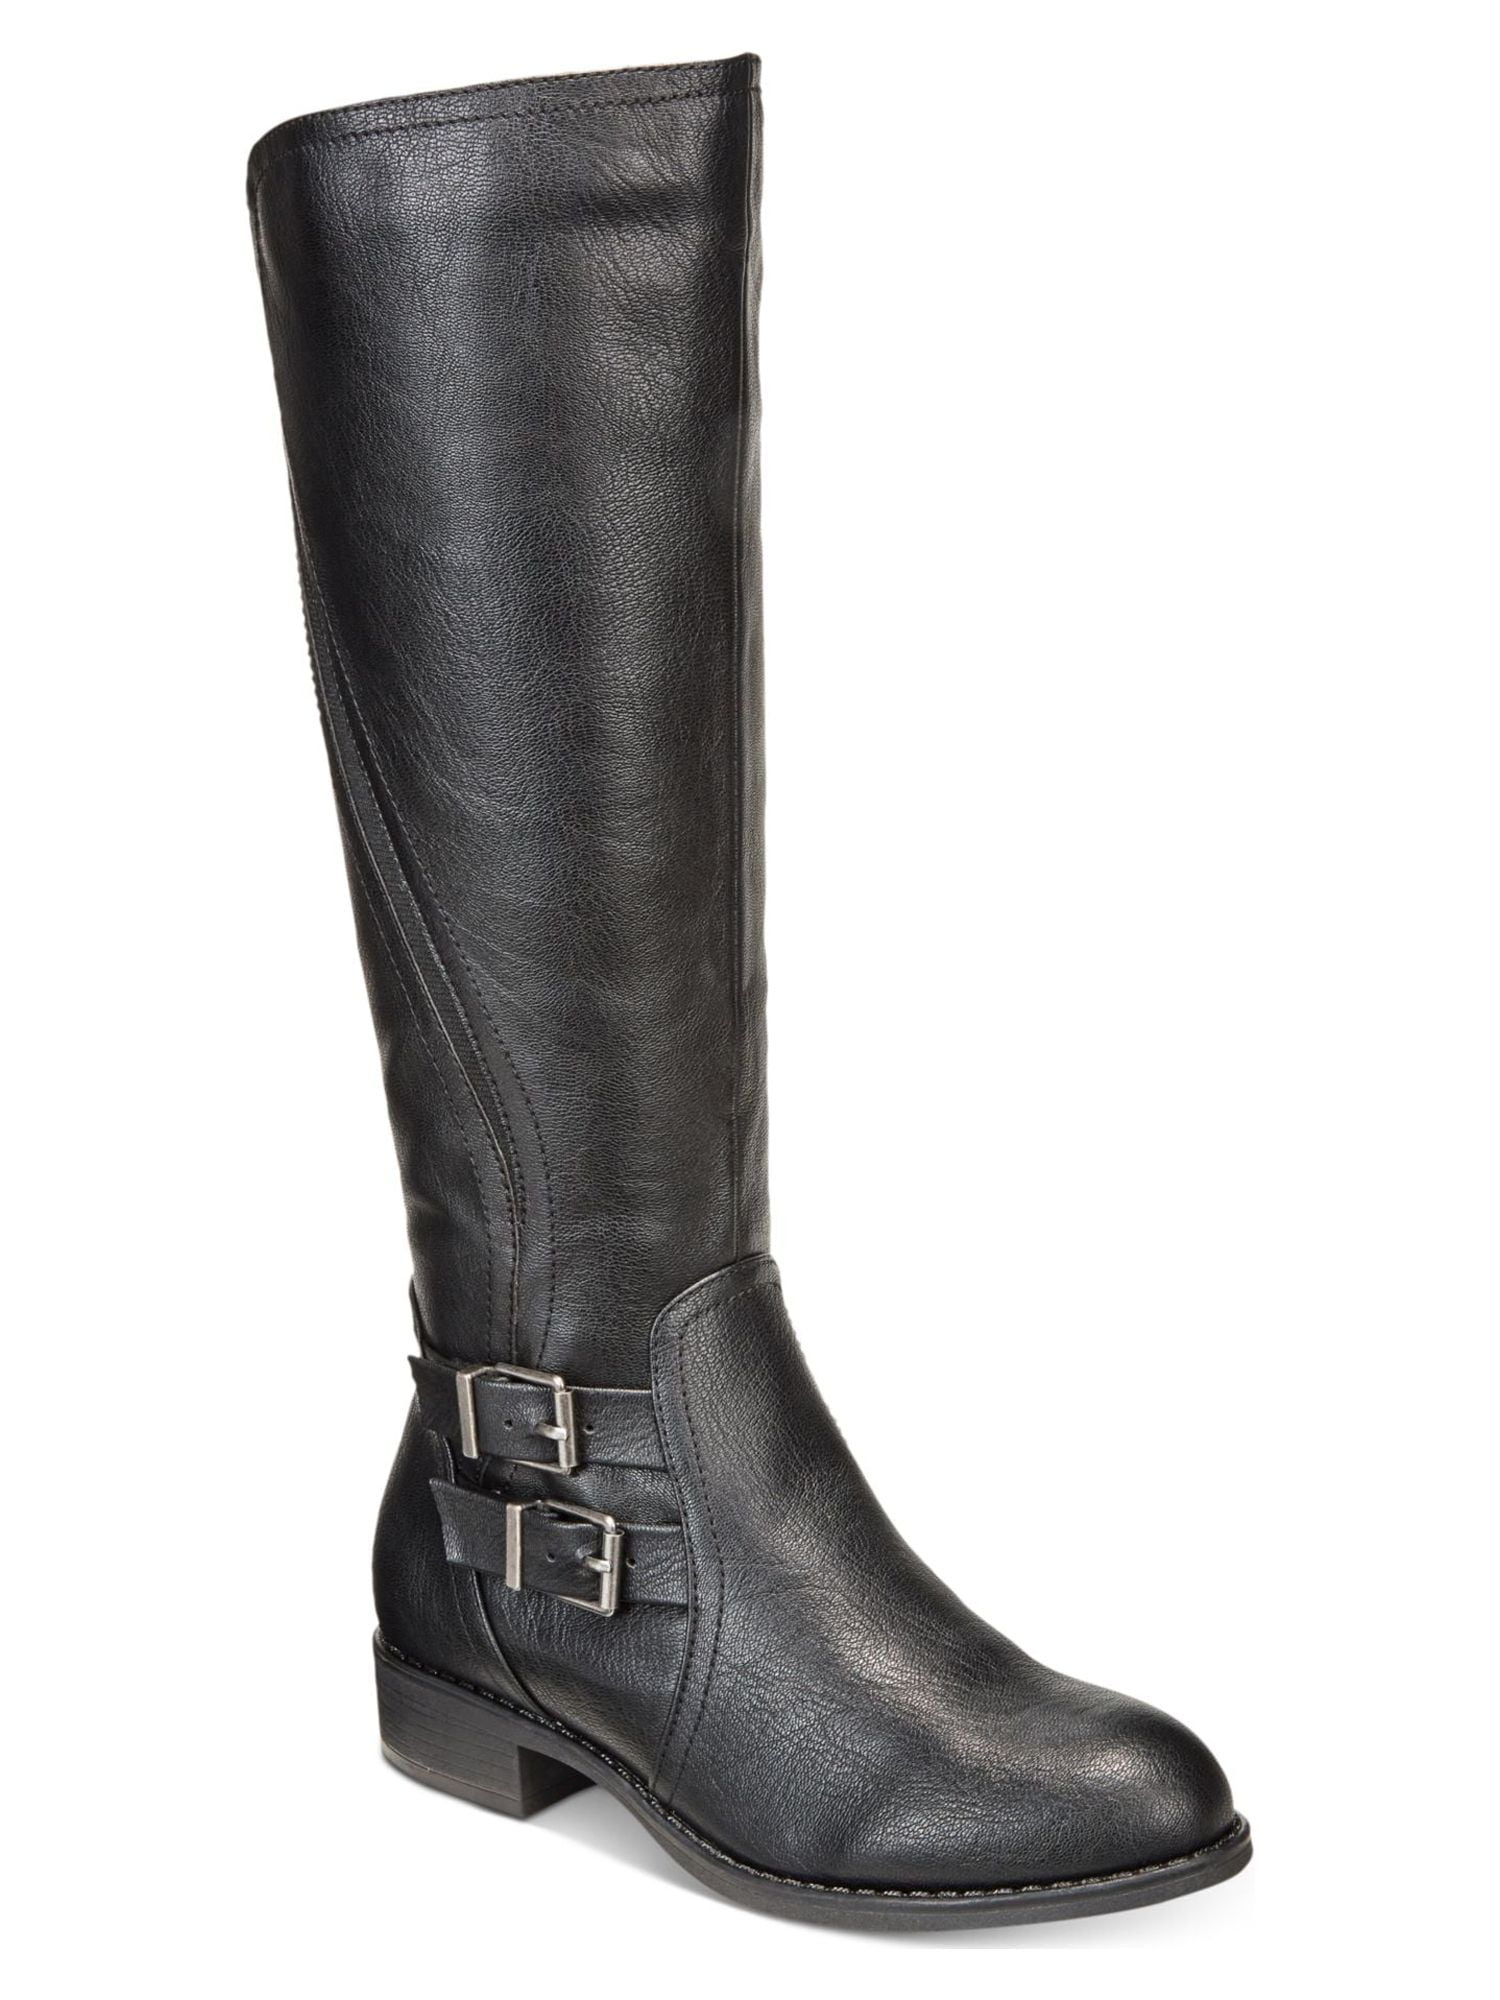 WMNS Extreme Wedge Boots - Double Accent Straps with Buckles / Gray